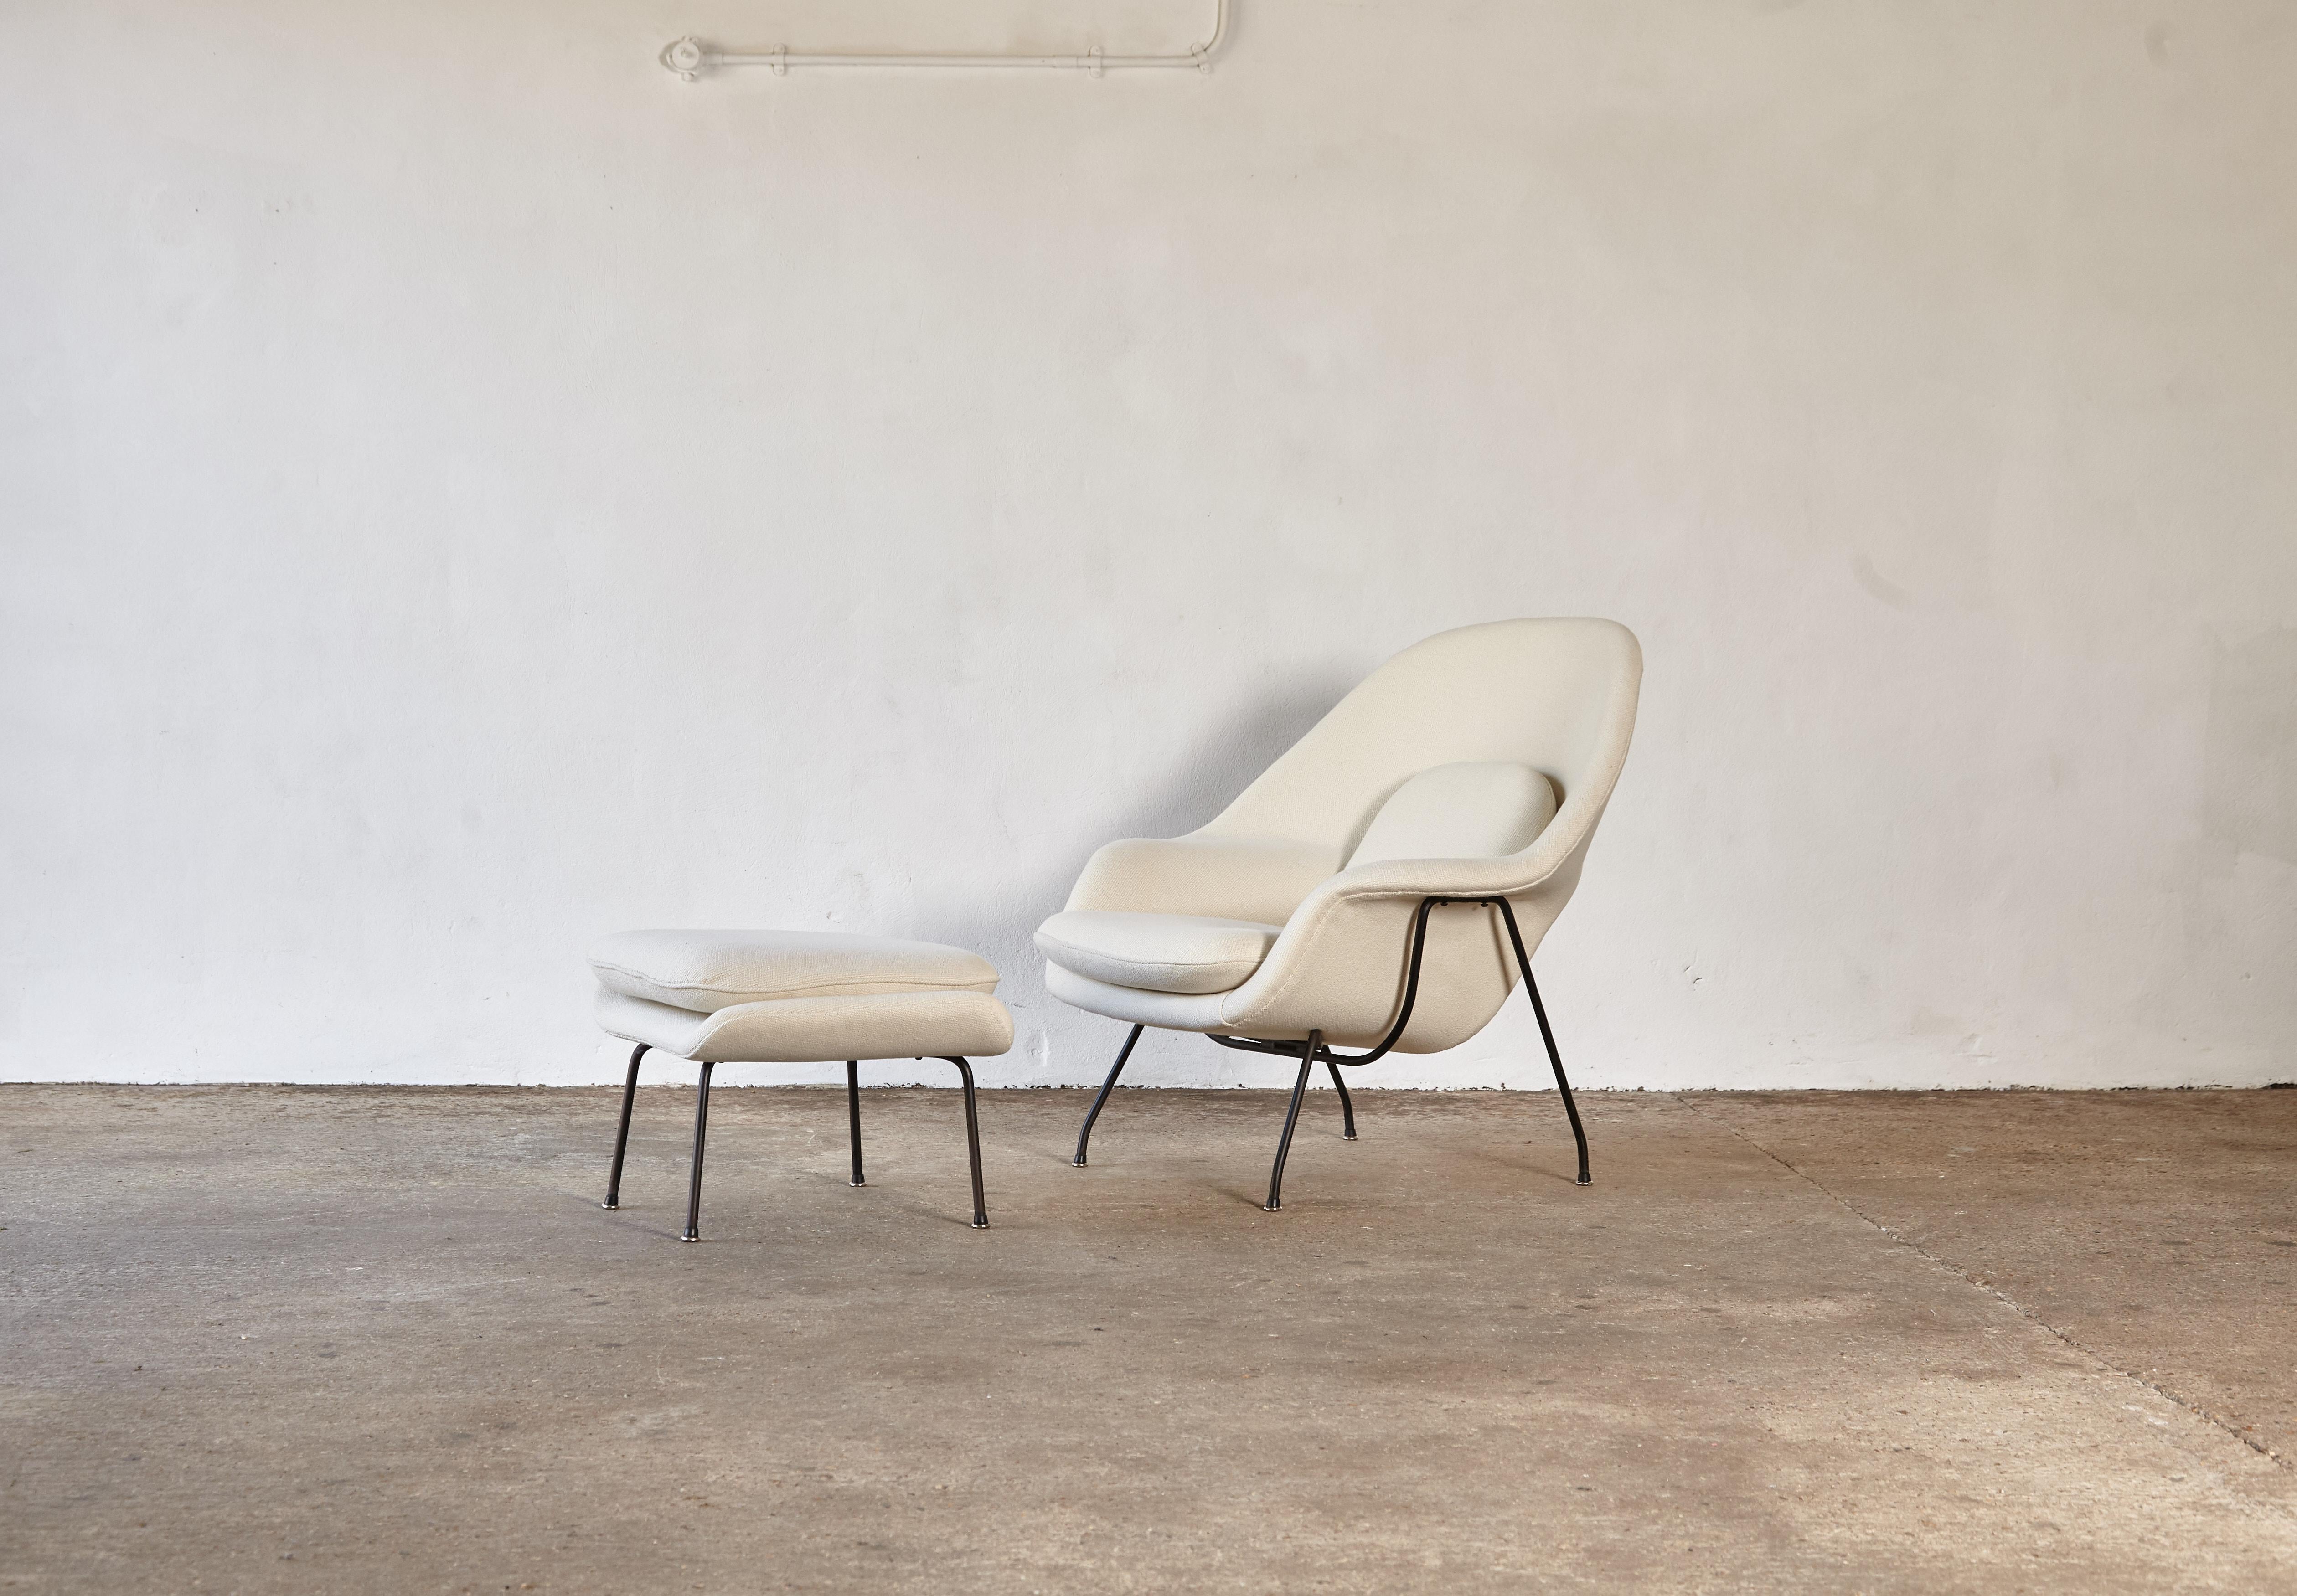 Eero Saarinen womb chair and ottoman, made by Knoll, USA, 1950s-1960s. Early production with black enameled steel frame. Restored and reupholstered in ivory fabric.





Measures: Chair

H 94 cm
W 100
D 99/100 (with cushion)
SH